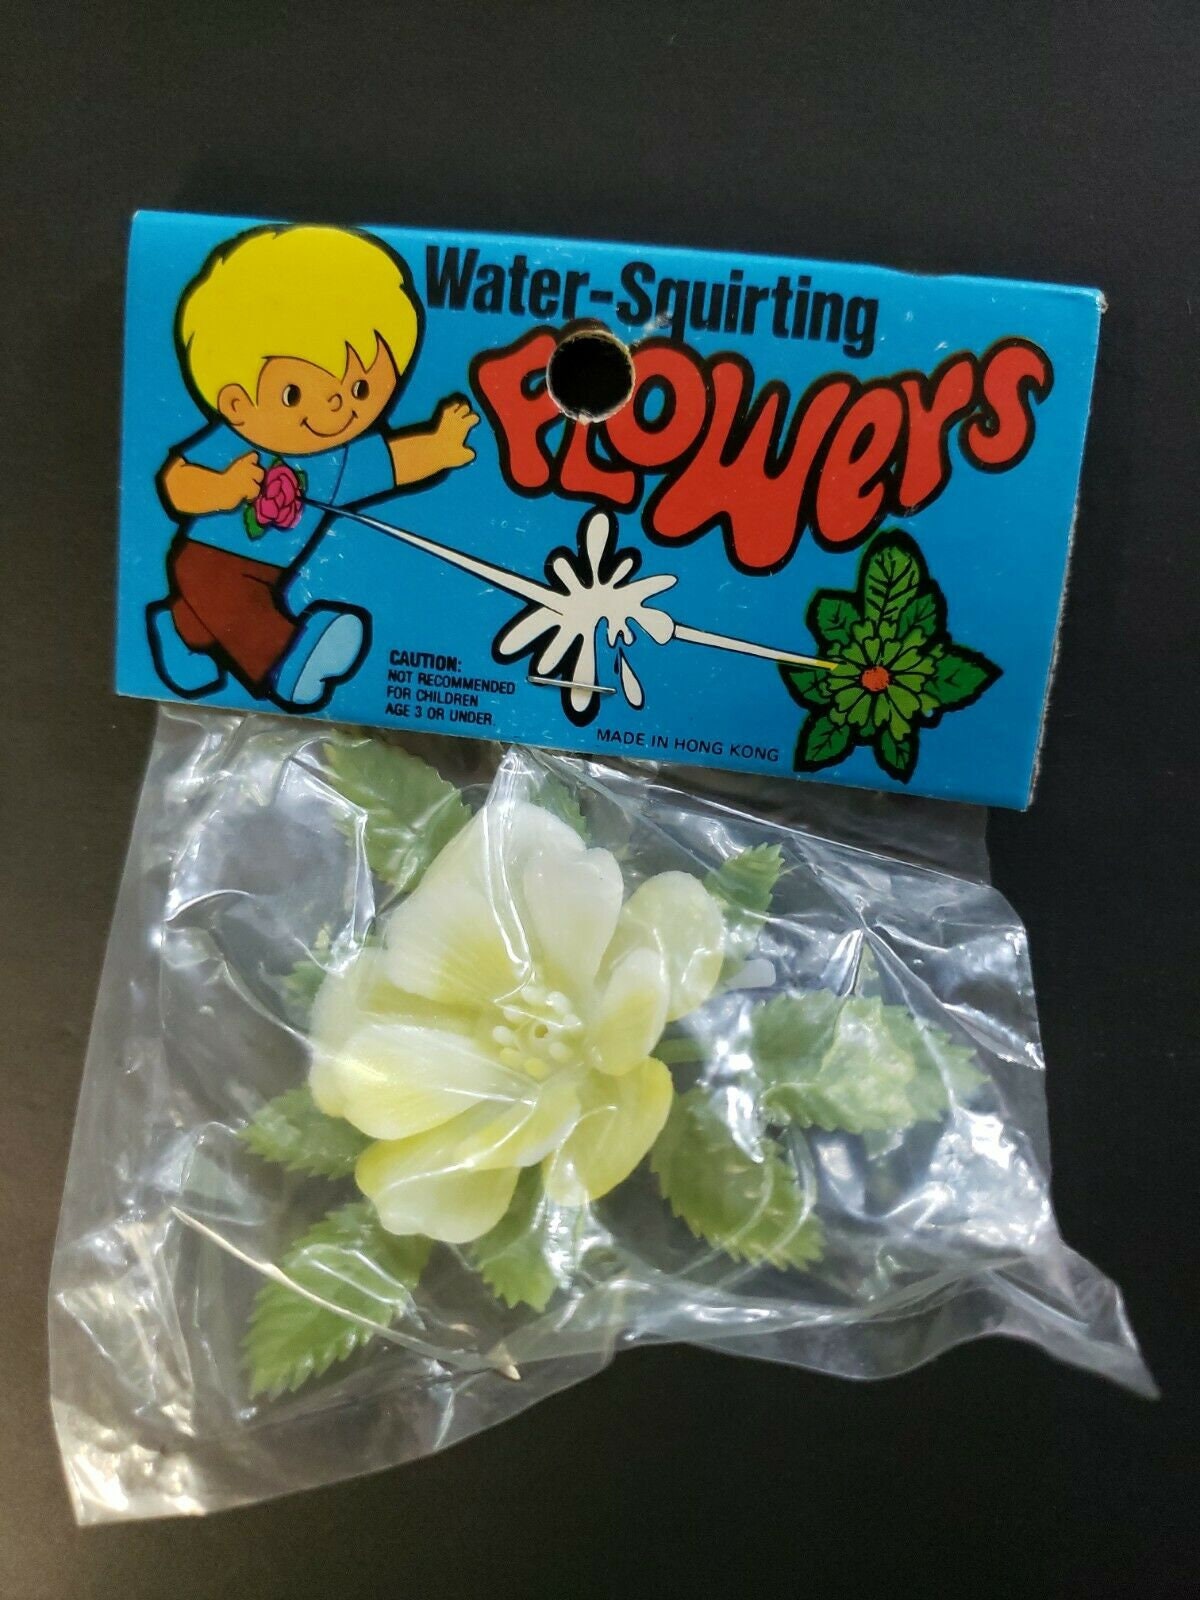 Squirts Flower